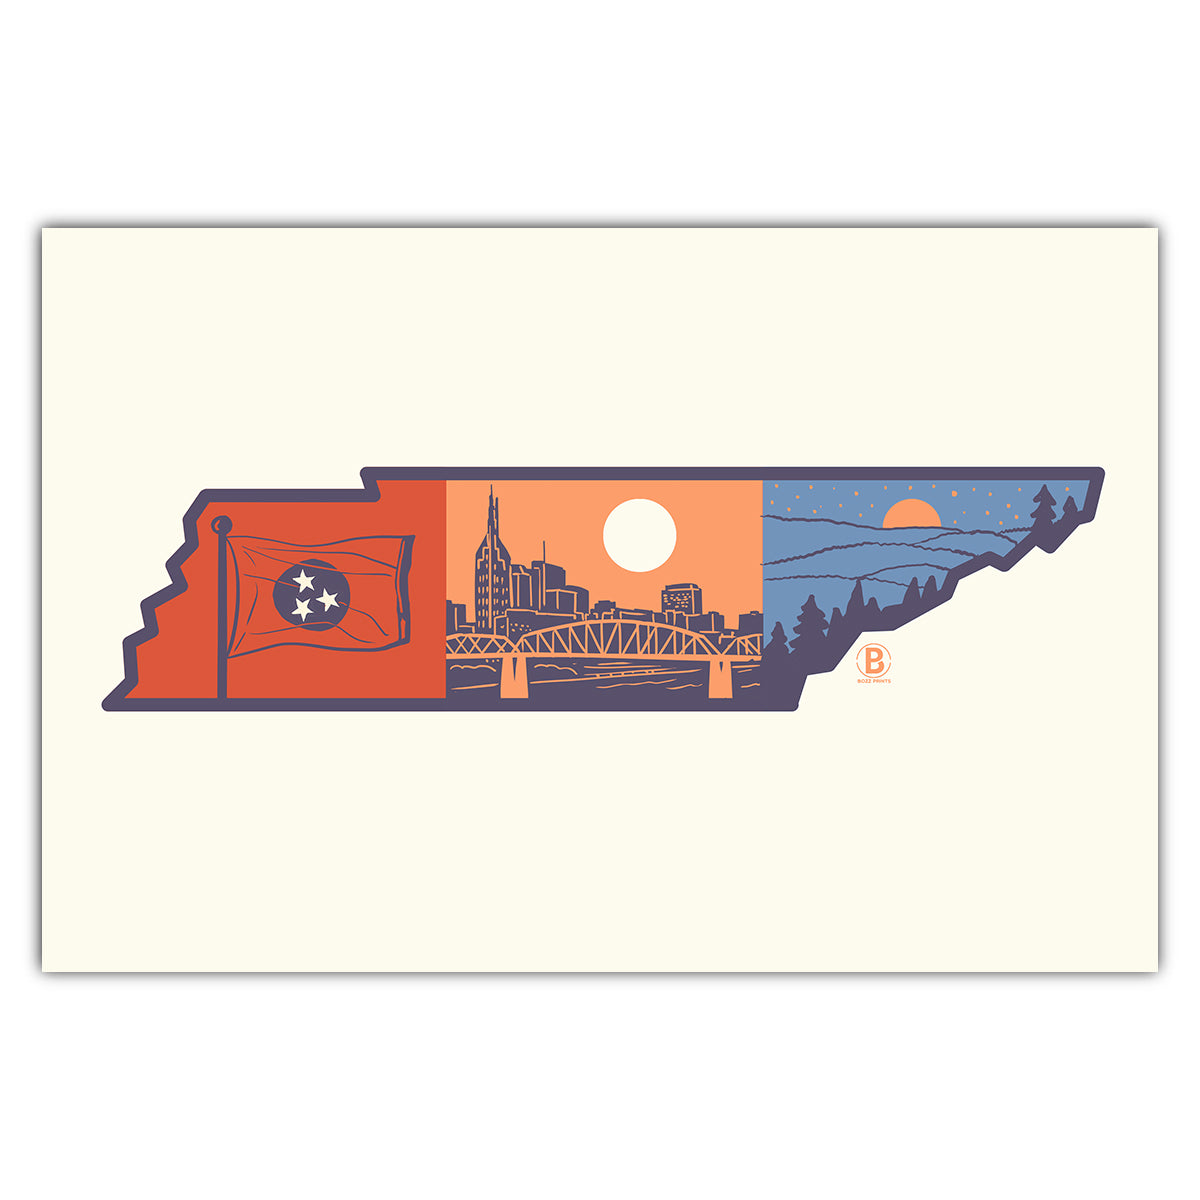 Layers of Tennessee Postcard - Bozz Prints